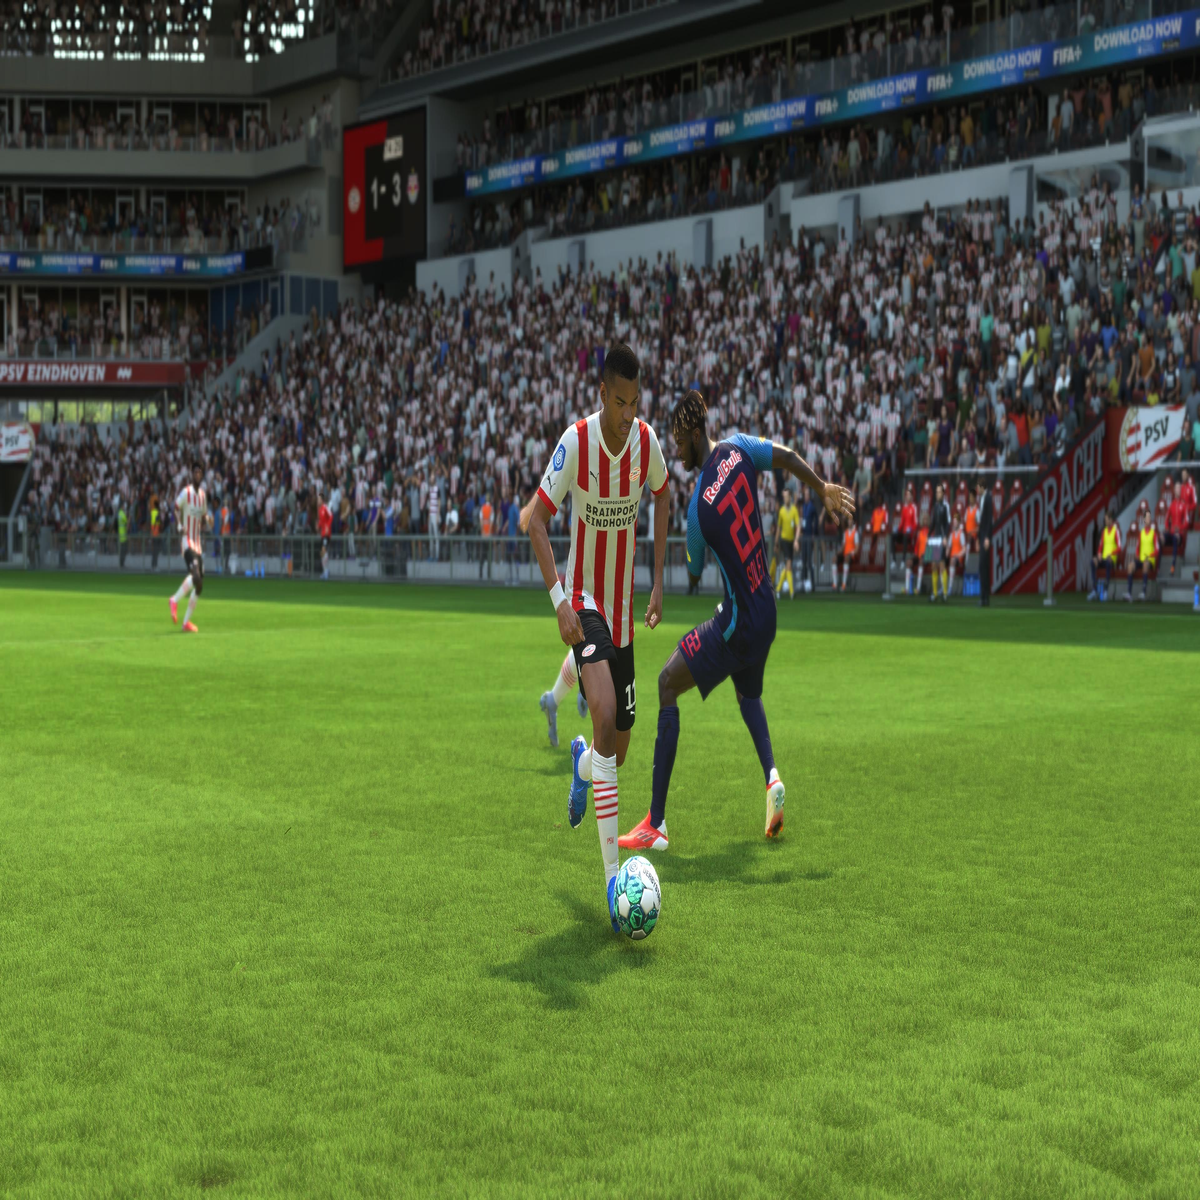 How To Download FIFA 23 On PC - Full Guide 